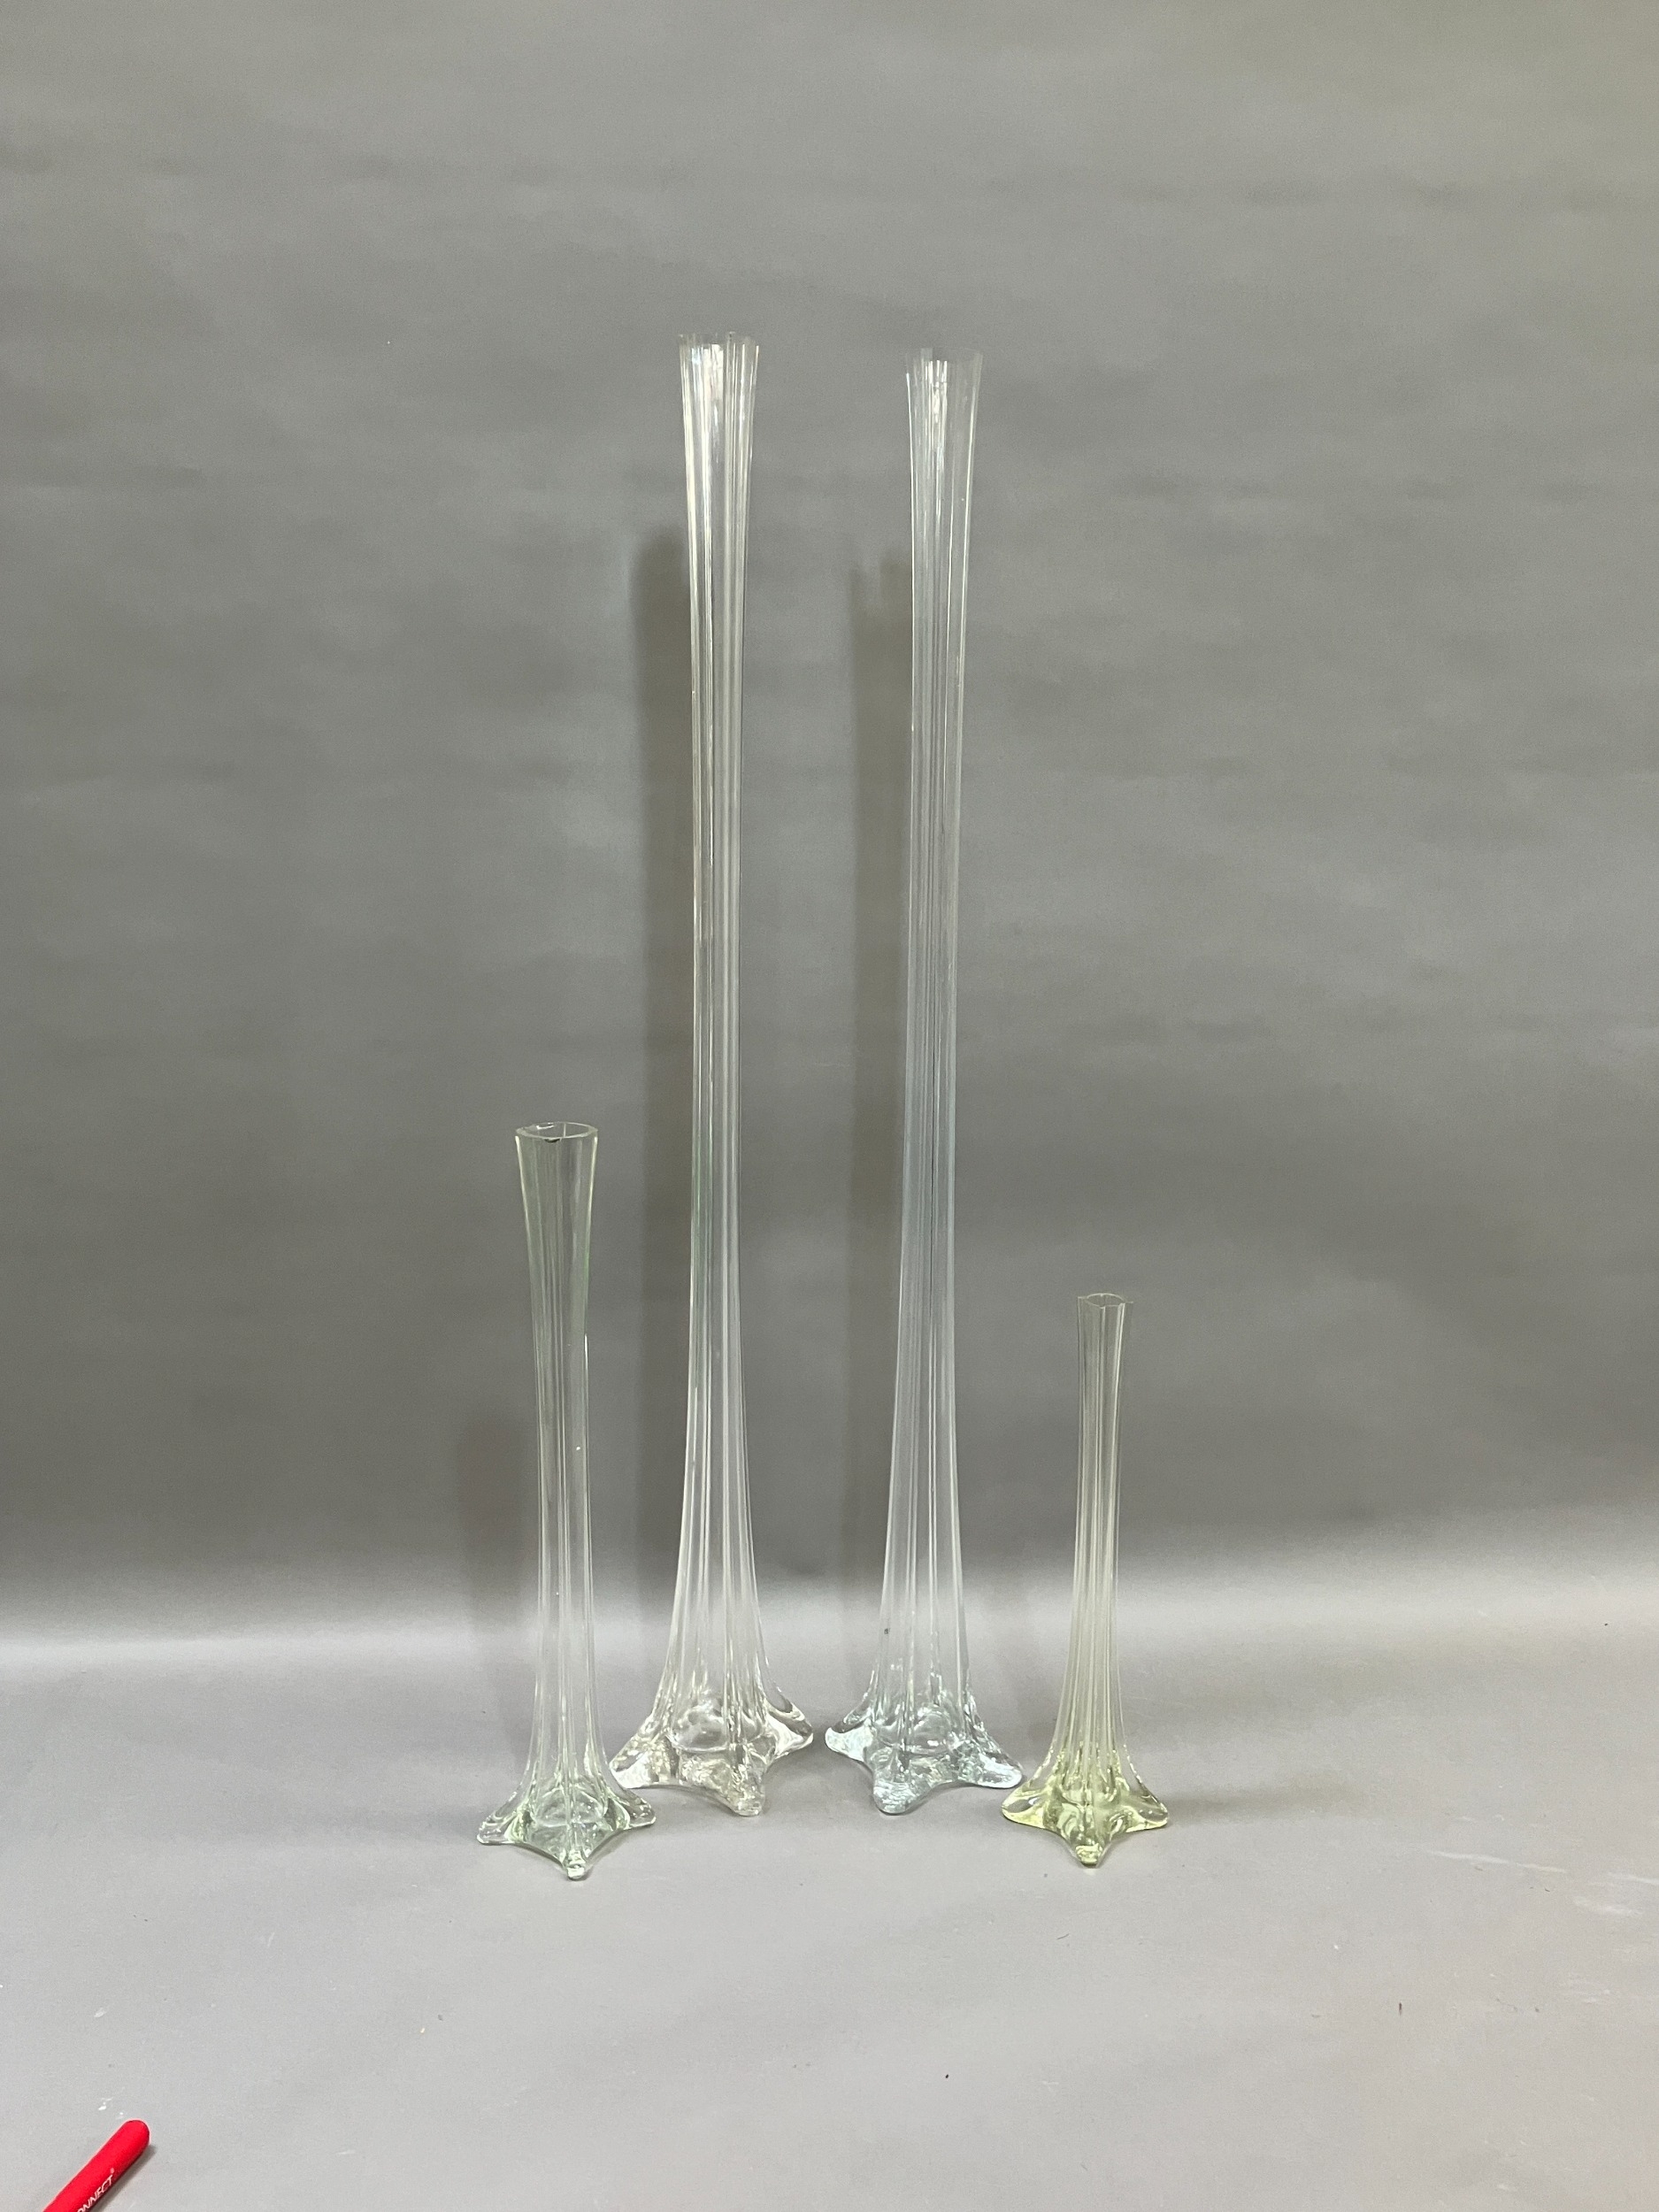 Two tall lily vases 100cm, together with two others of 50cm and 38cm